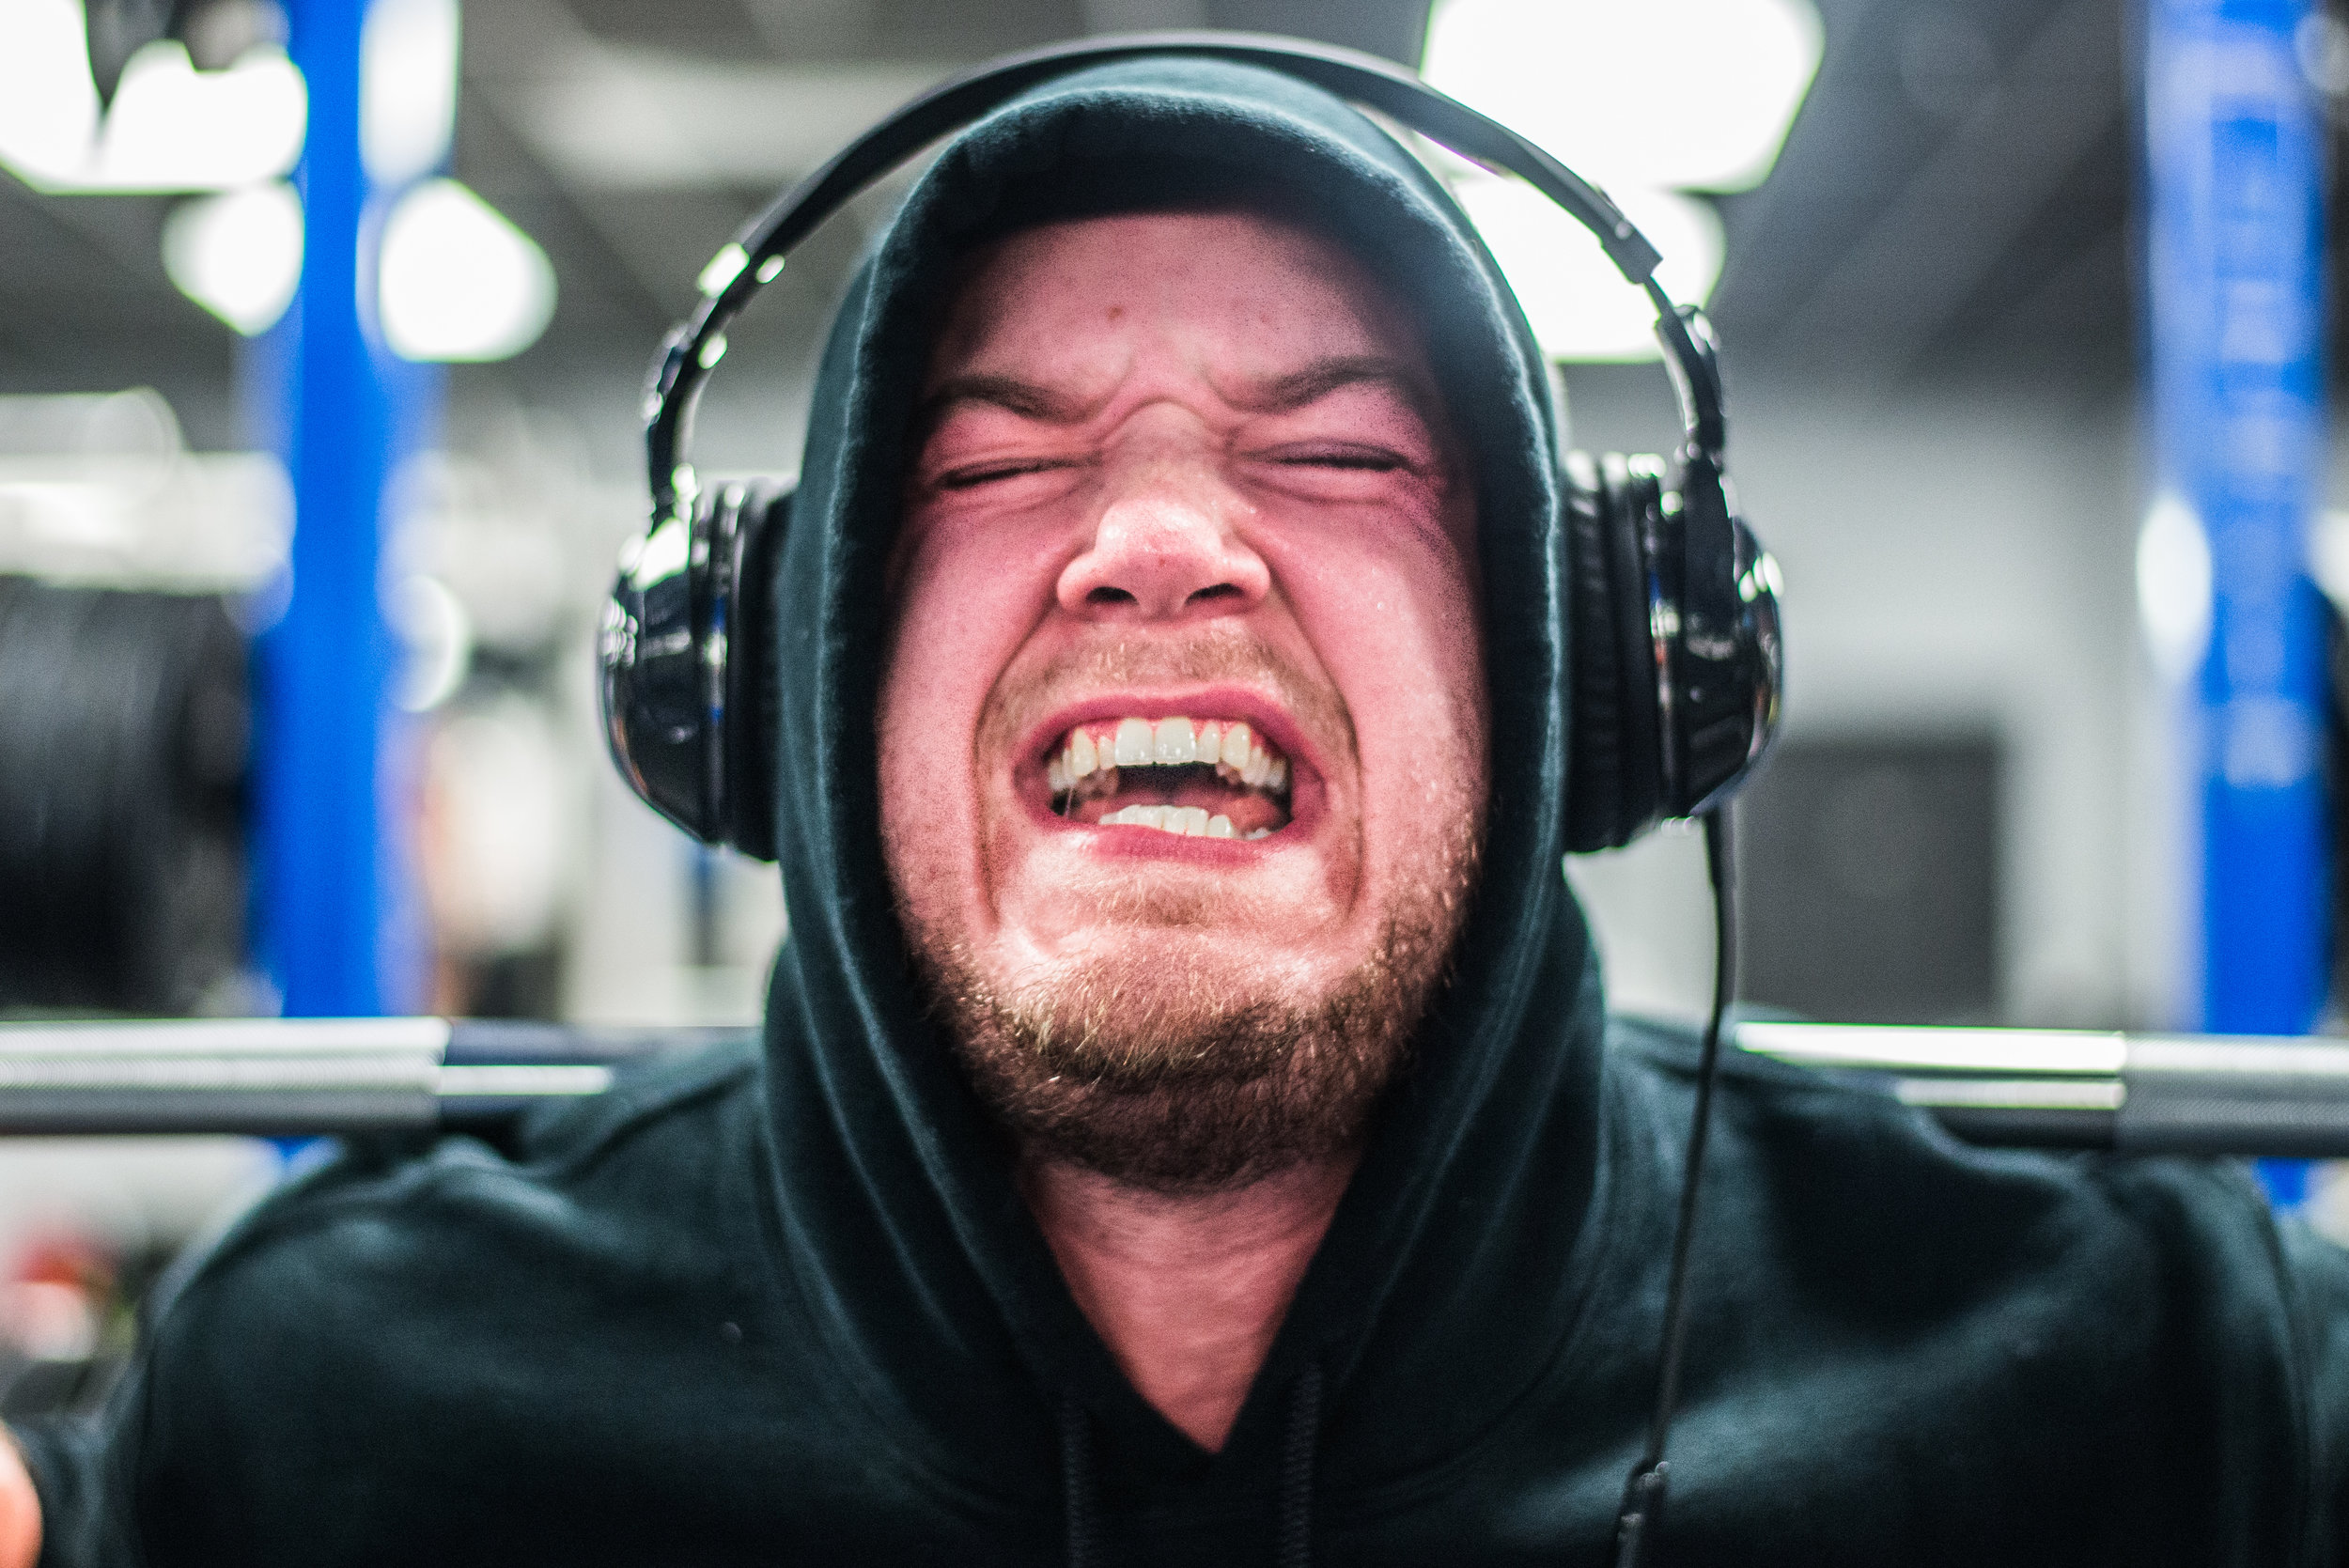  Brett yells during a squat, Oct. 9 at Mountain Town Fitness in Mount Pleasant, Michigan. "I didn't really have an opportunity to compete because of my life in the military," Brett said. "So I sat back, watched and learned, and finally got on stage a